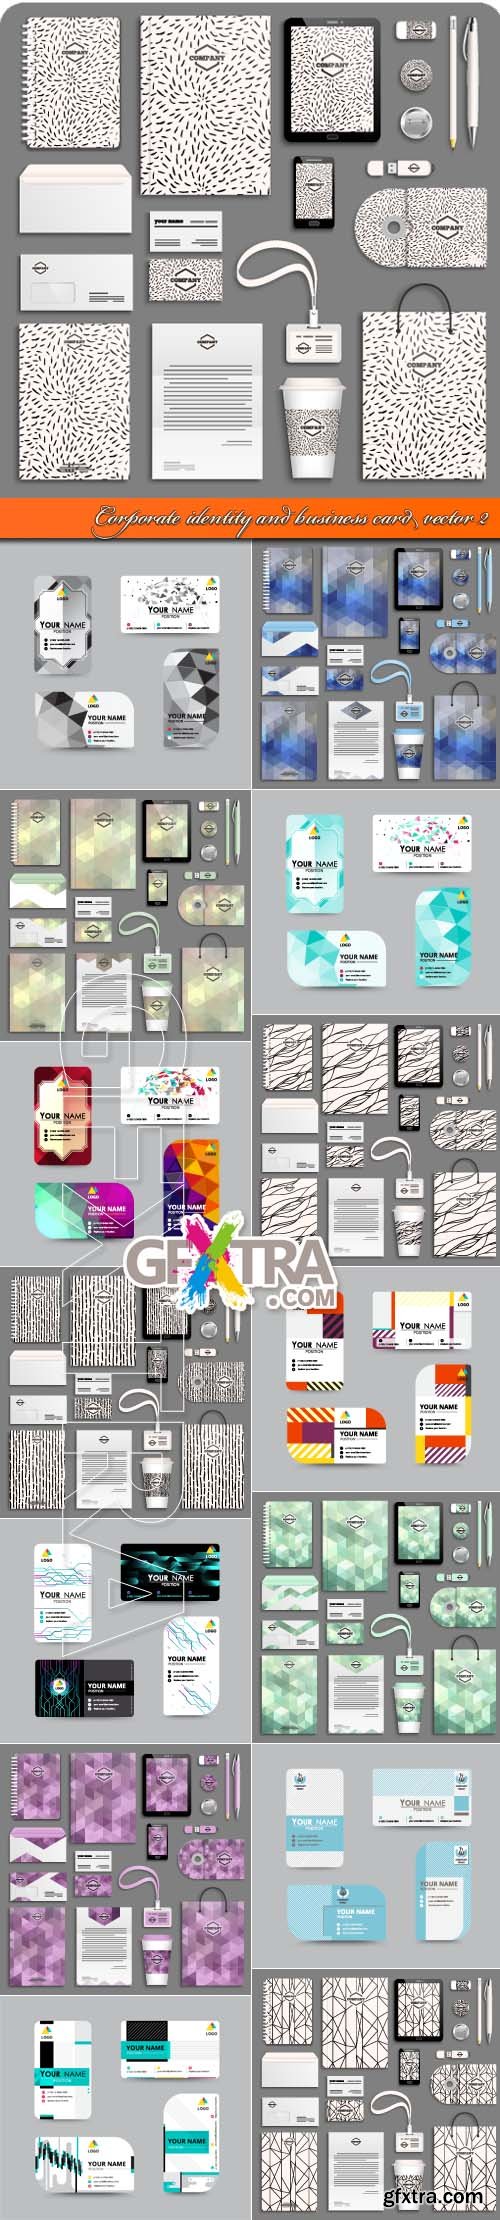 Corporate identity and business card vector 2